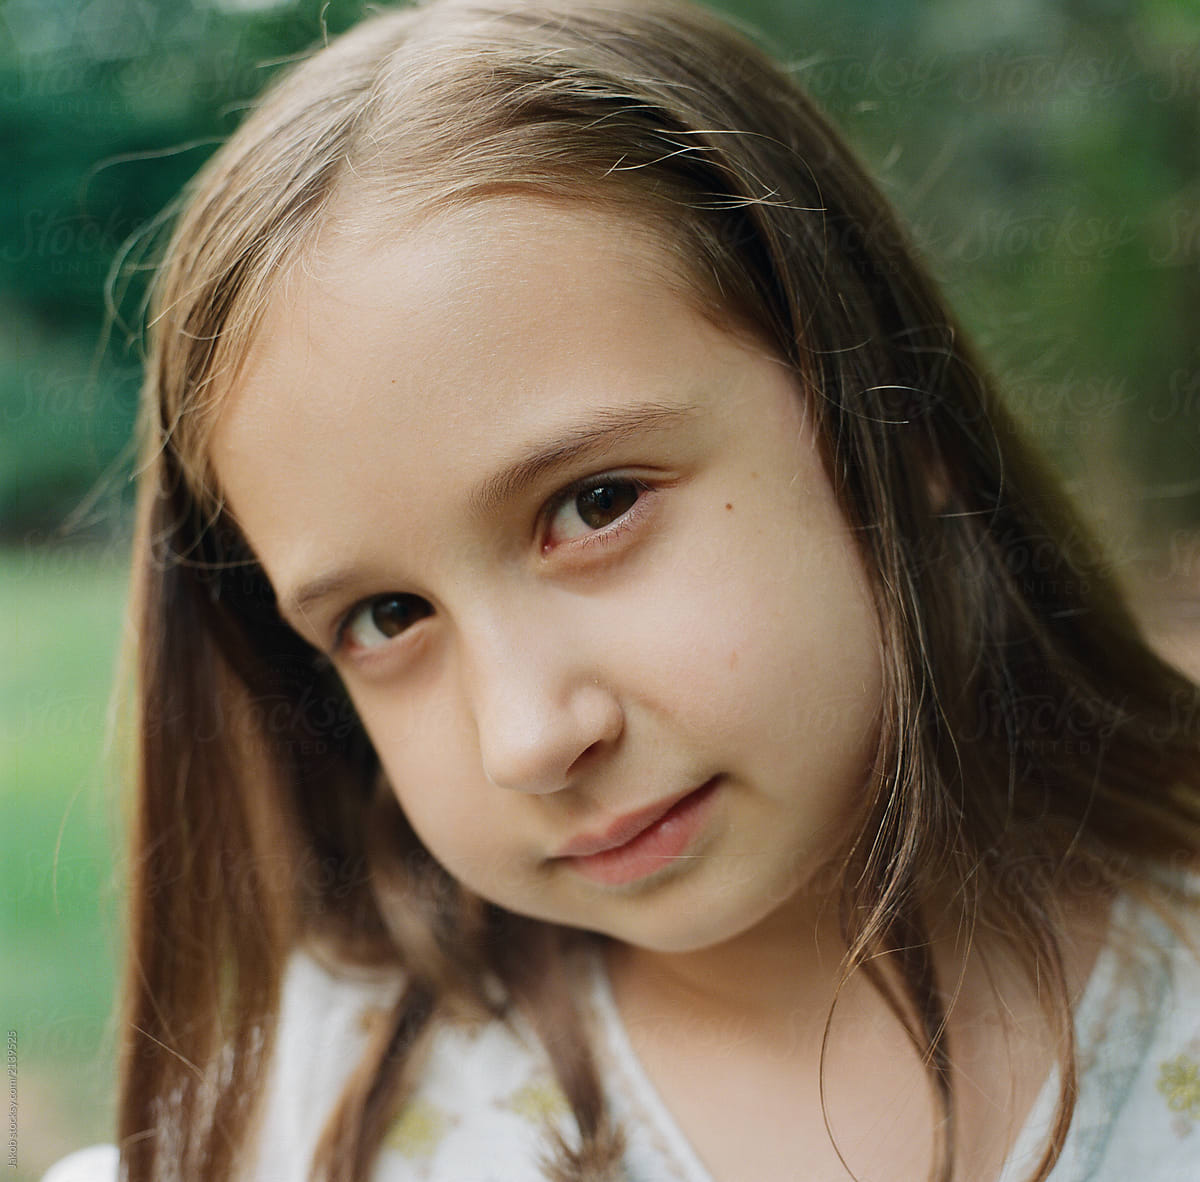 Portrait Of A Beautiful Young Girl by Stocksy Contributor Jakob  Lagerstedt - Stocksy